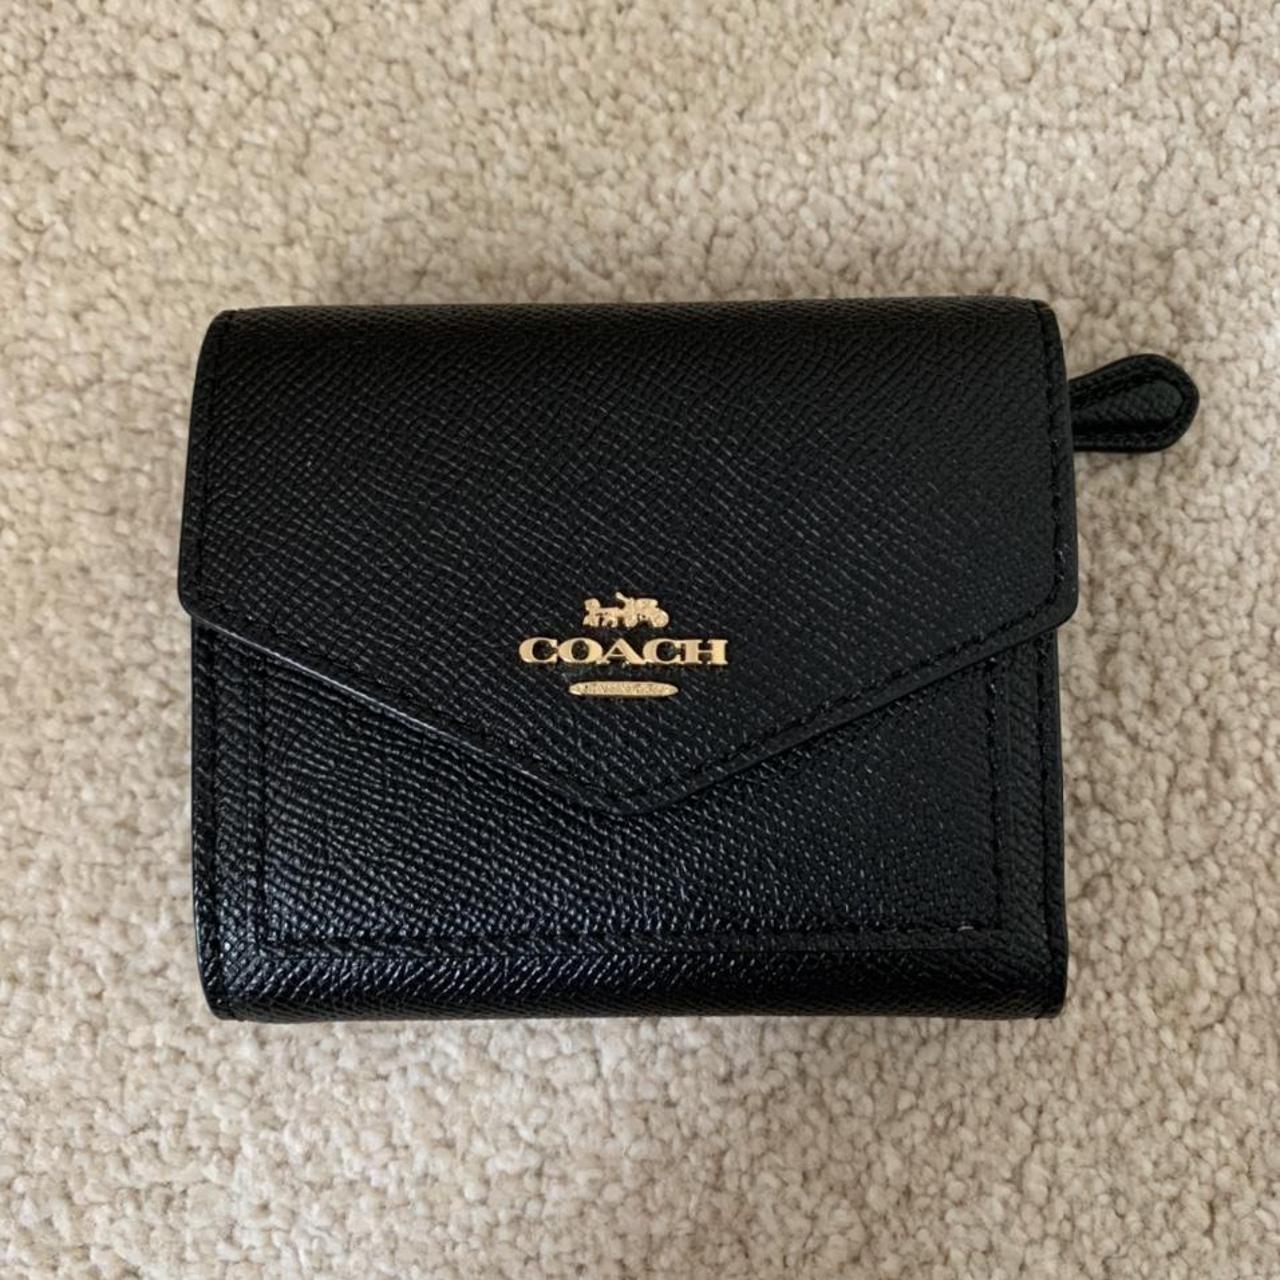 Coach Small Wallet in Black Pebbled Leather and Gold... - Depop